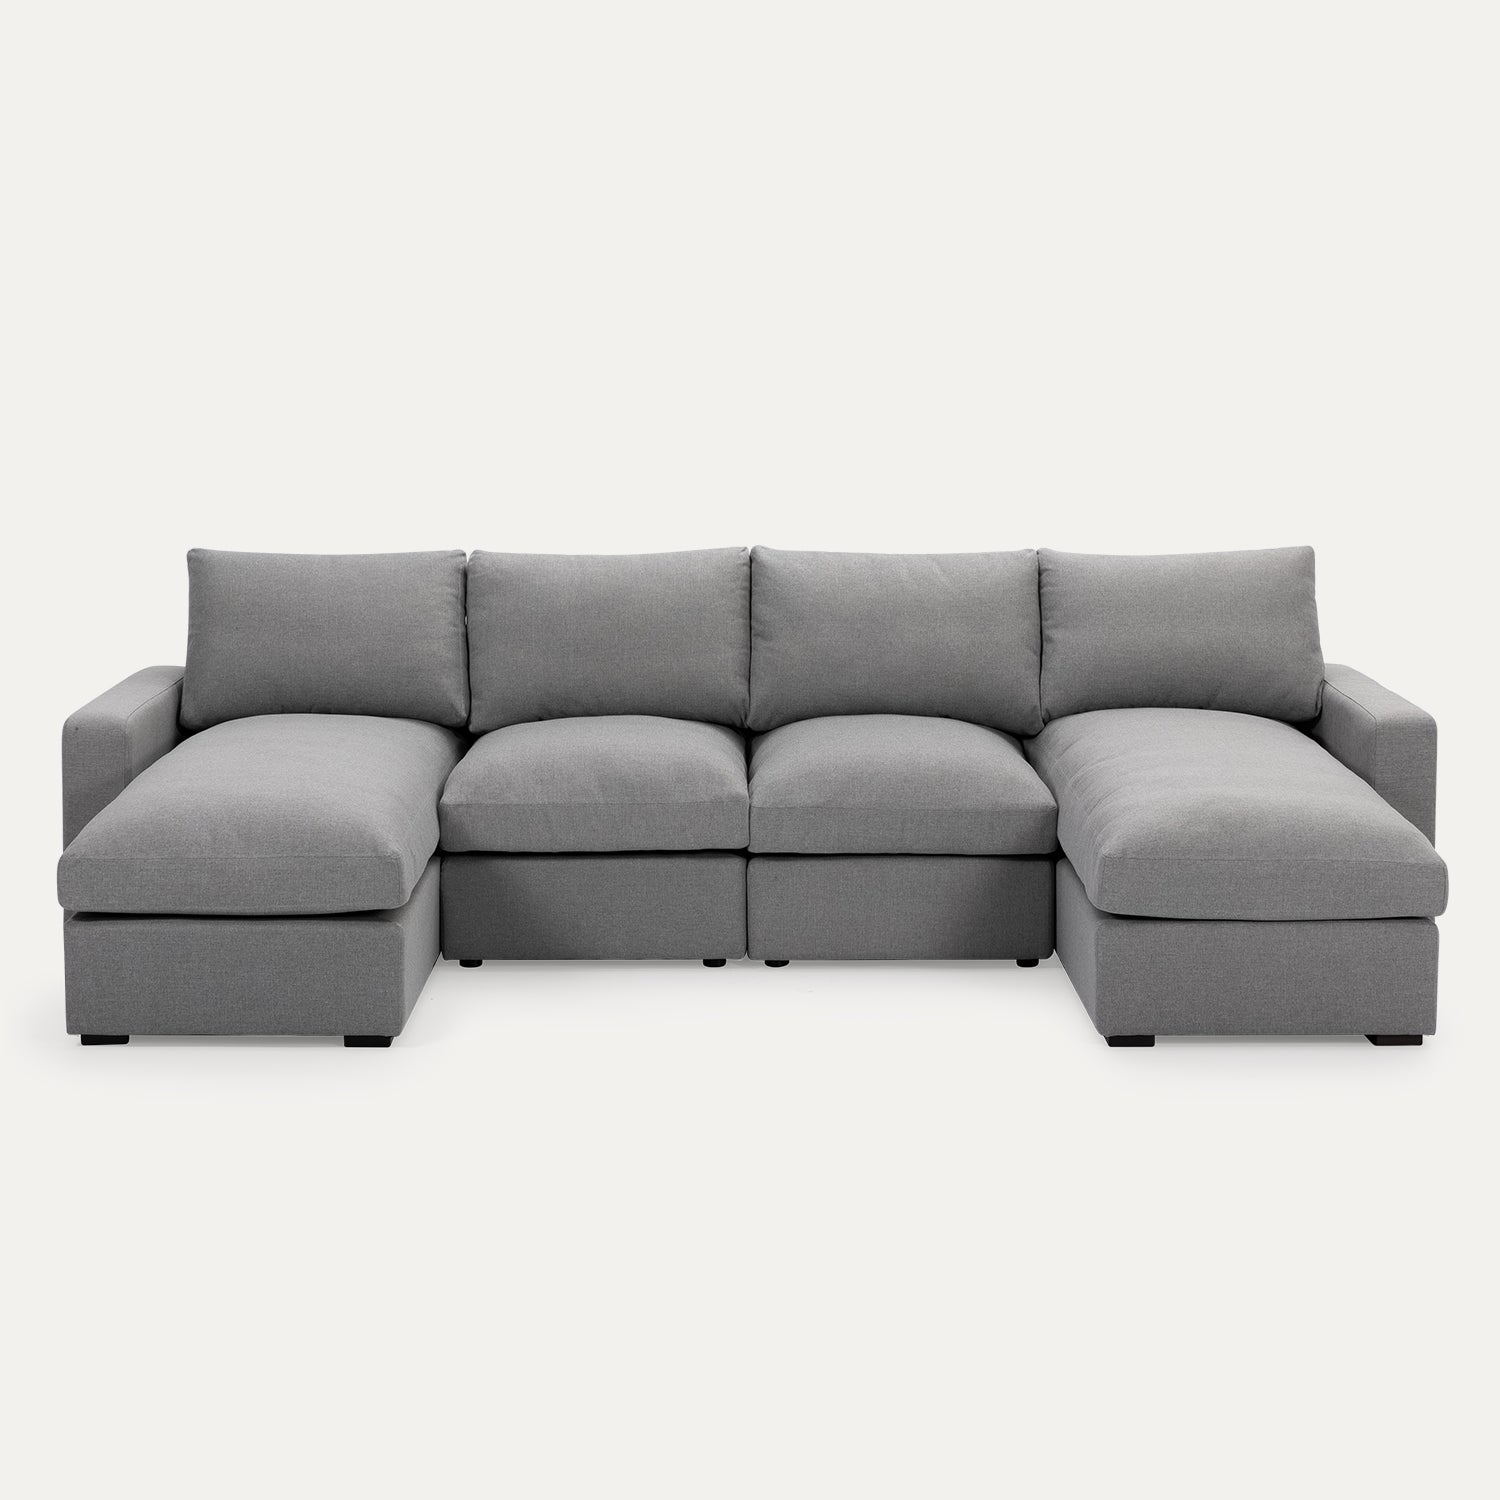 Jamison Double Chaise Sectional Sofa